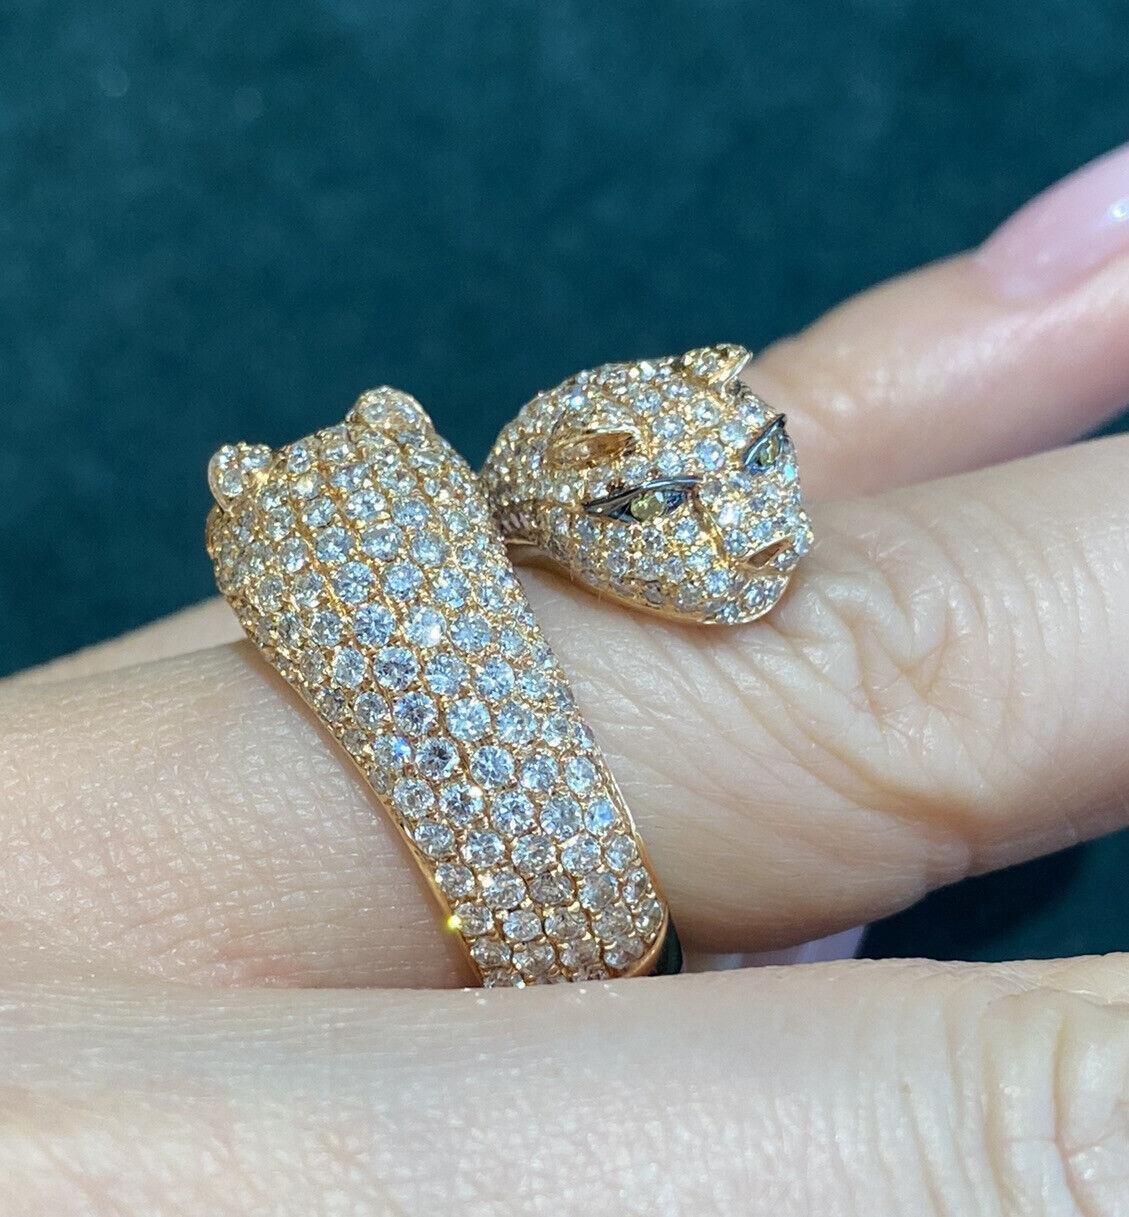 Double Panther Head Diamond Wrap Ring 3.70 carat total weight in 18k Rose Gold

Double Panther Head Diamond Ring features two Panther Heads wrapping around the finger, adorned with 3.70 carats of Round Brilliant Diamonds, pave-set, and 2 Yellow